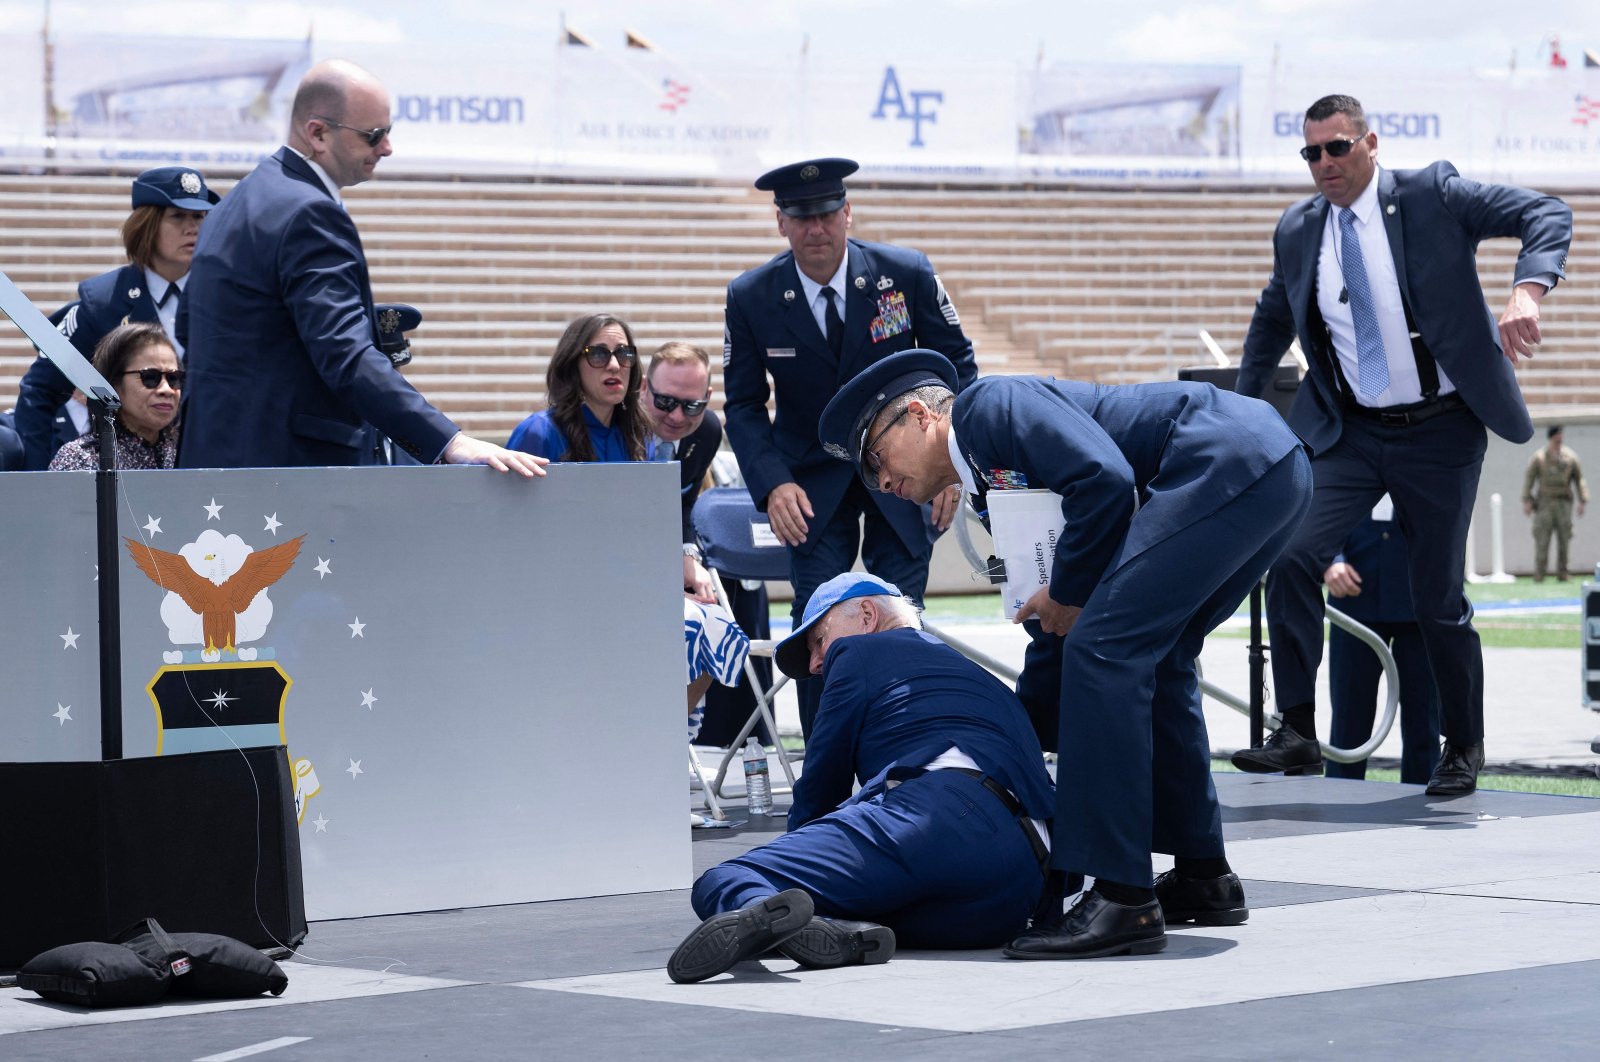 U.S. President Joe Biden is helped up after falling during the graduation ceremony at the Air Force Academy, just north of Colorado Springs in El Paso County, Colorado, June 1, 2023. (AFP Photo)